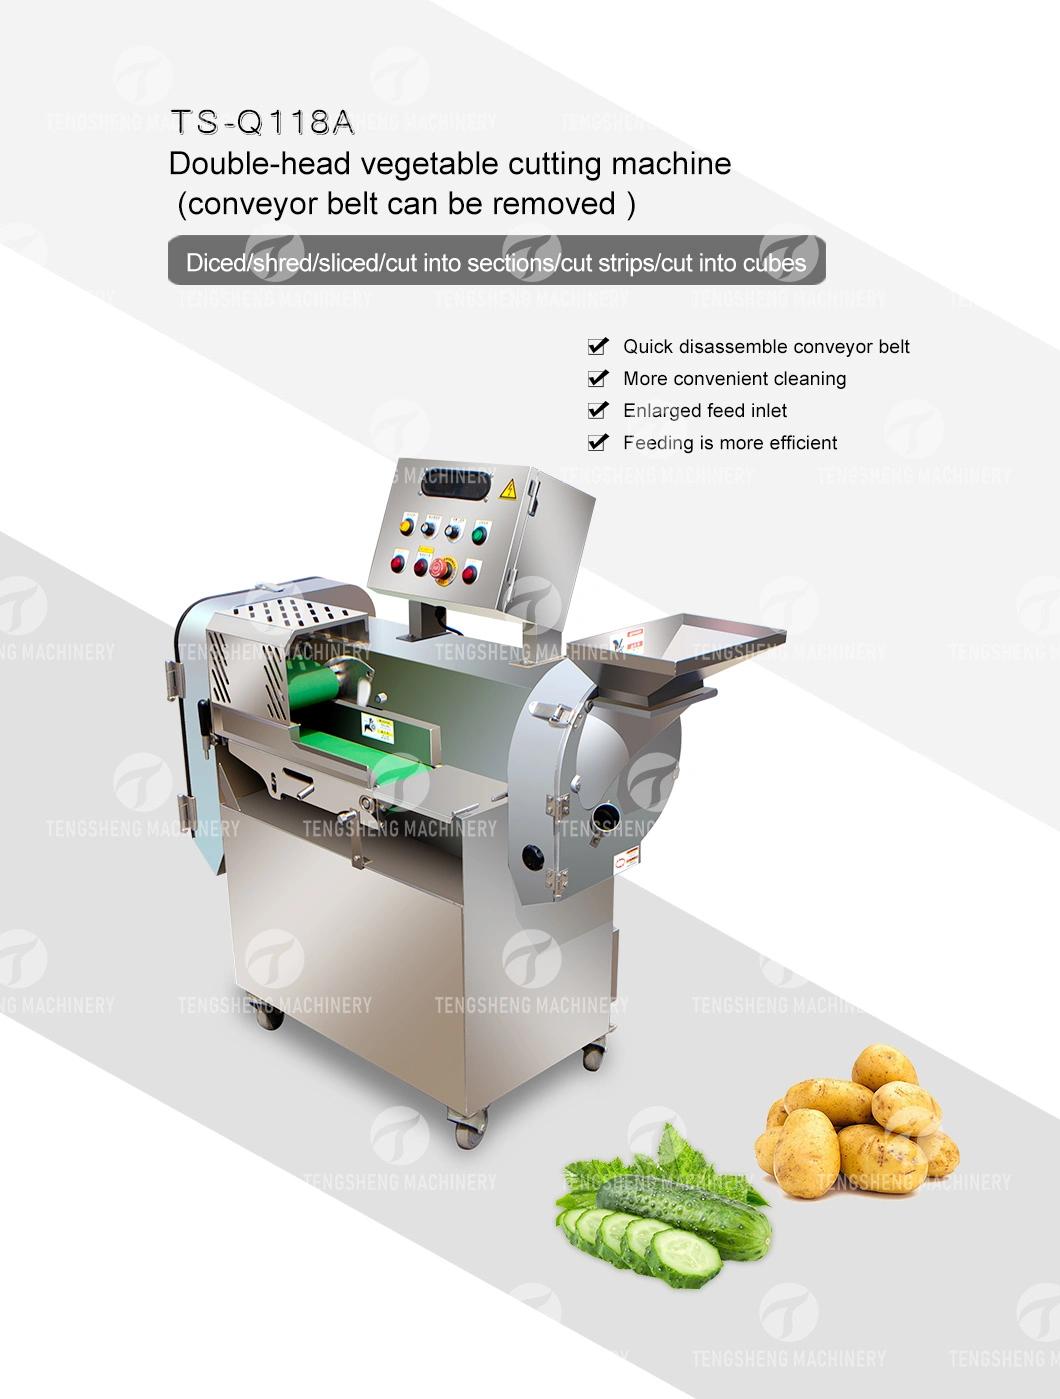 High Quality Leafy Vegetable Carrot Onion Potato Chip Electric Cutter Strip Cutting Machine Commercial Fruit Chopper Slicer Food Processor (TS-Q118A)